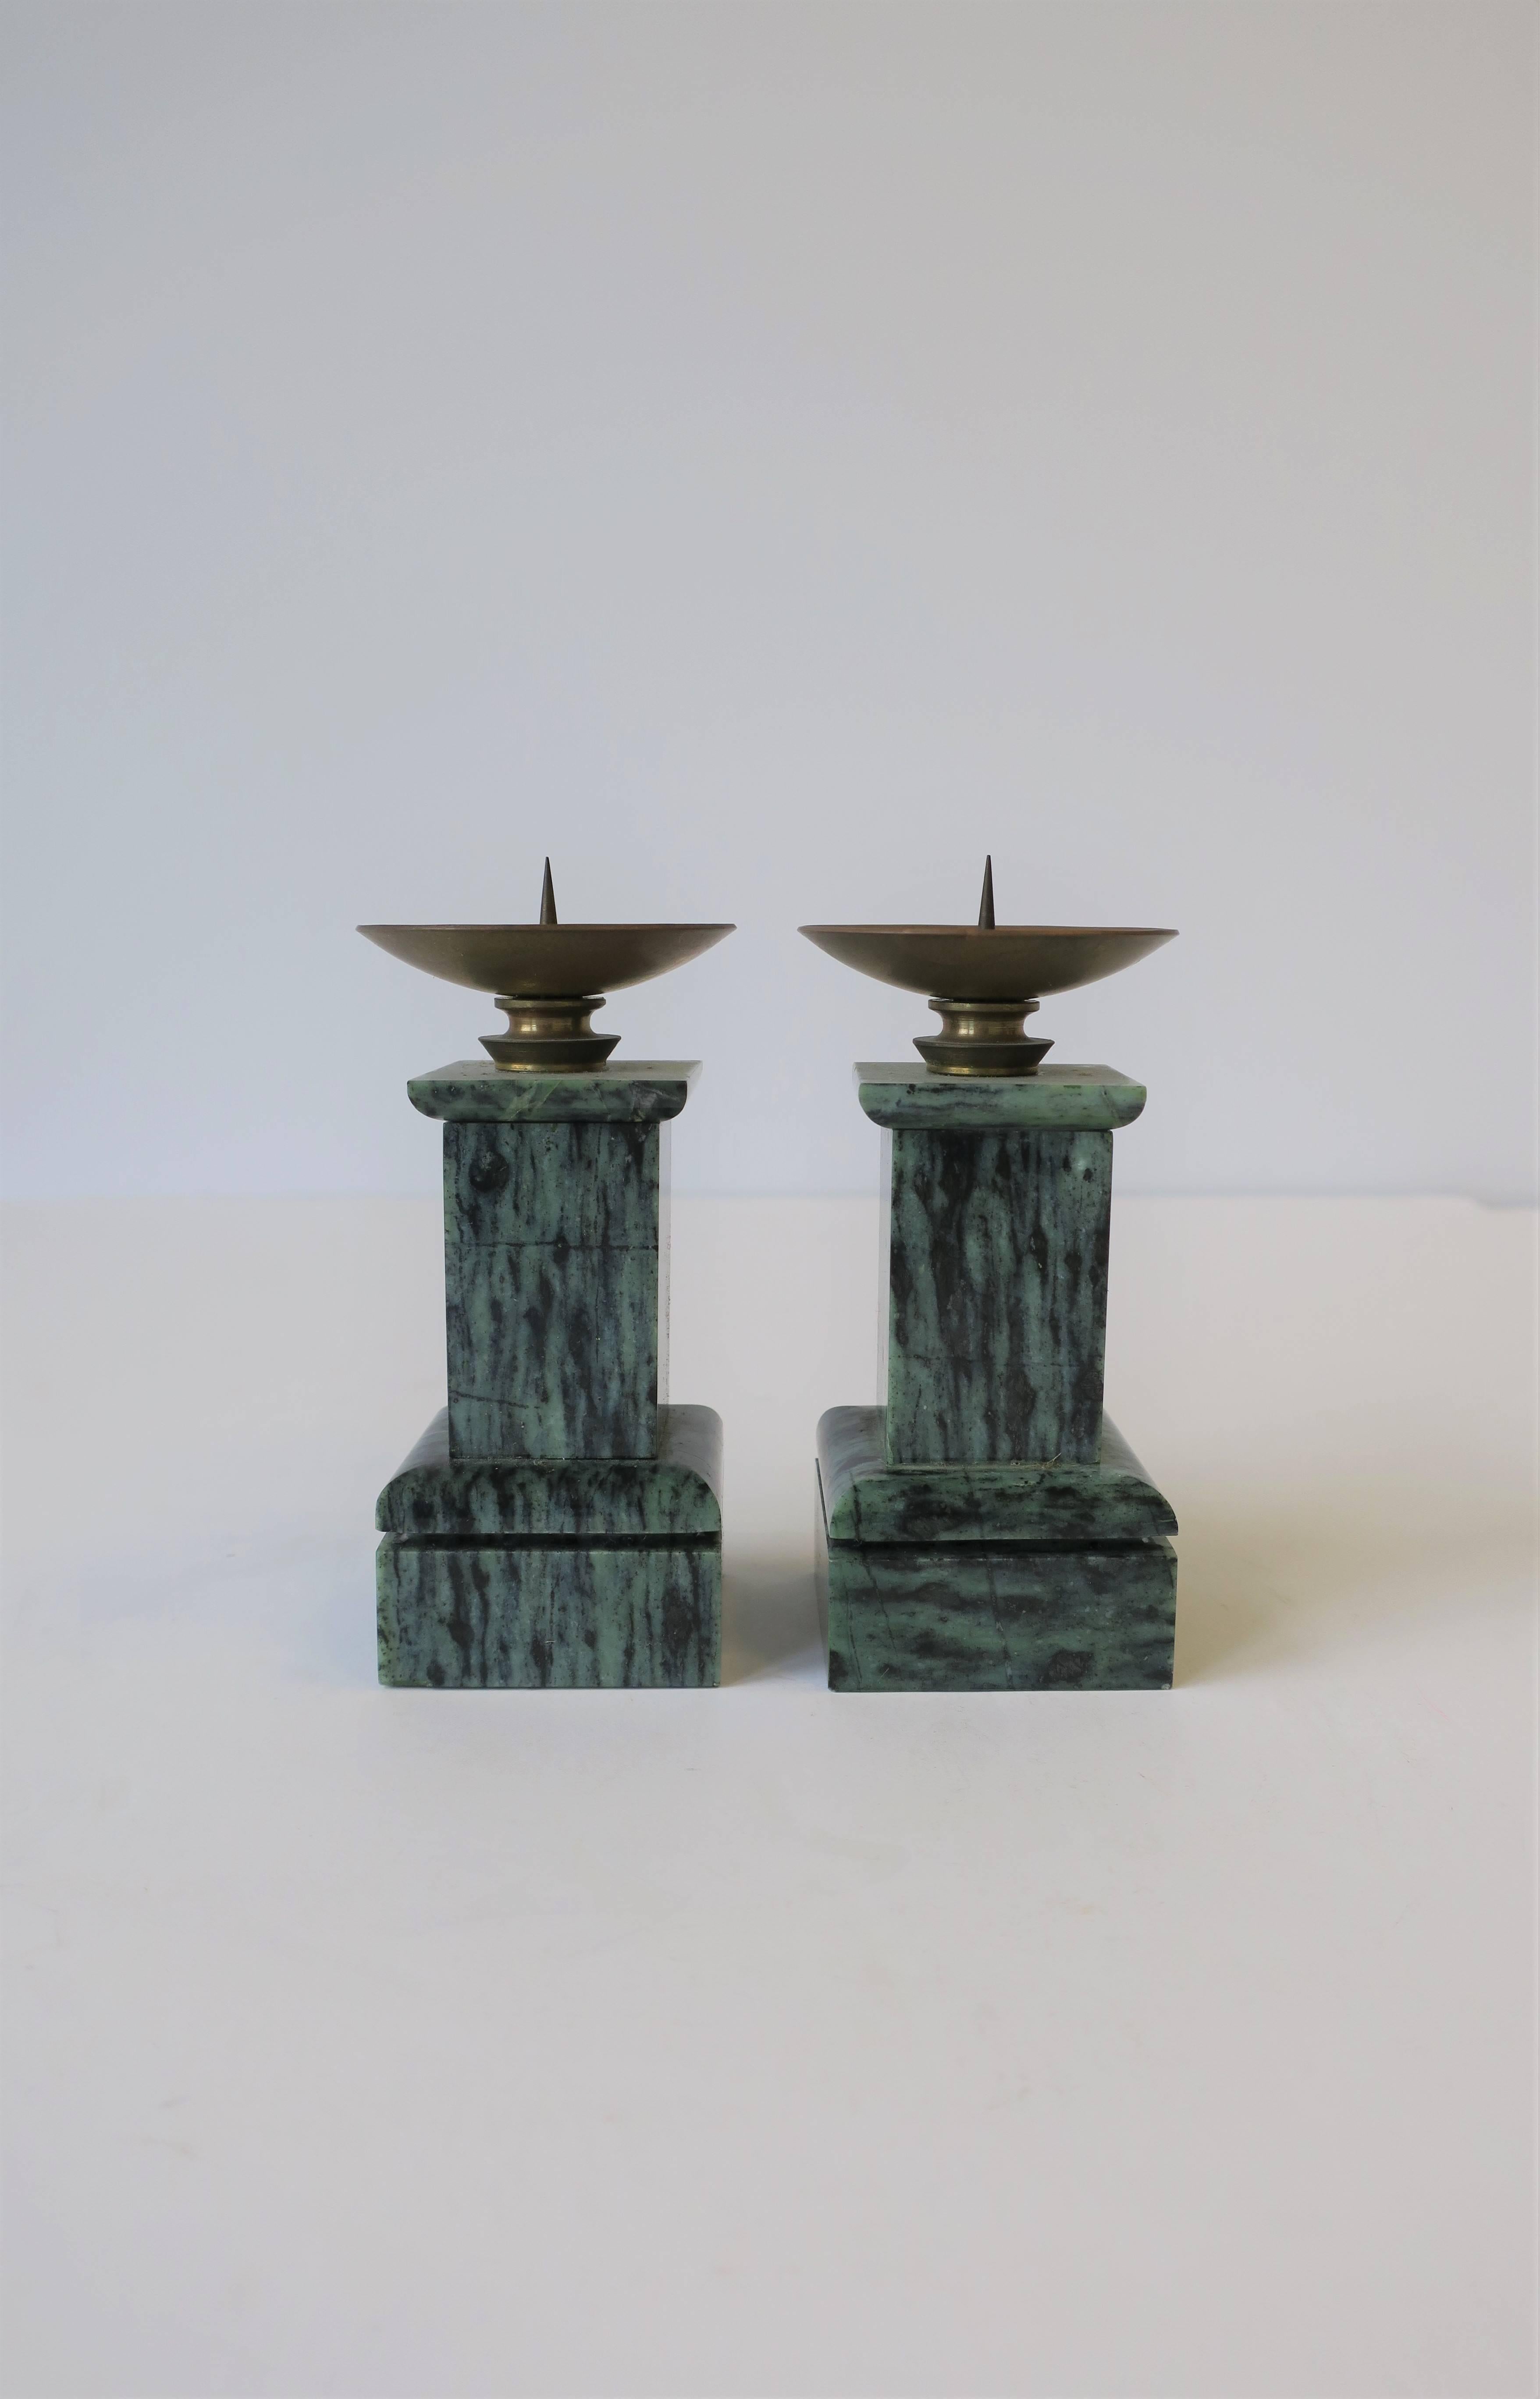 A beautiful pair of small well-made column pillar dark green and black marble candlestick holders with brass top, in the Neoclassical design style, circa mid-20th century. Candles shown in image #3 included with purchase. Very good condition as